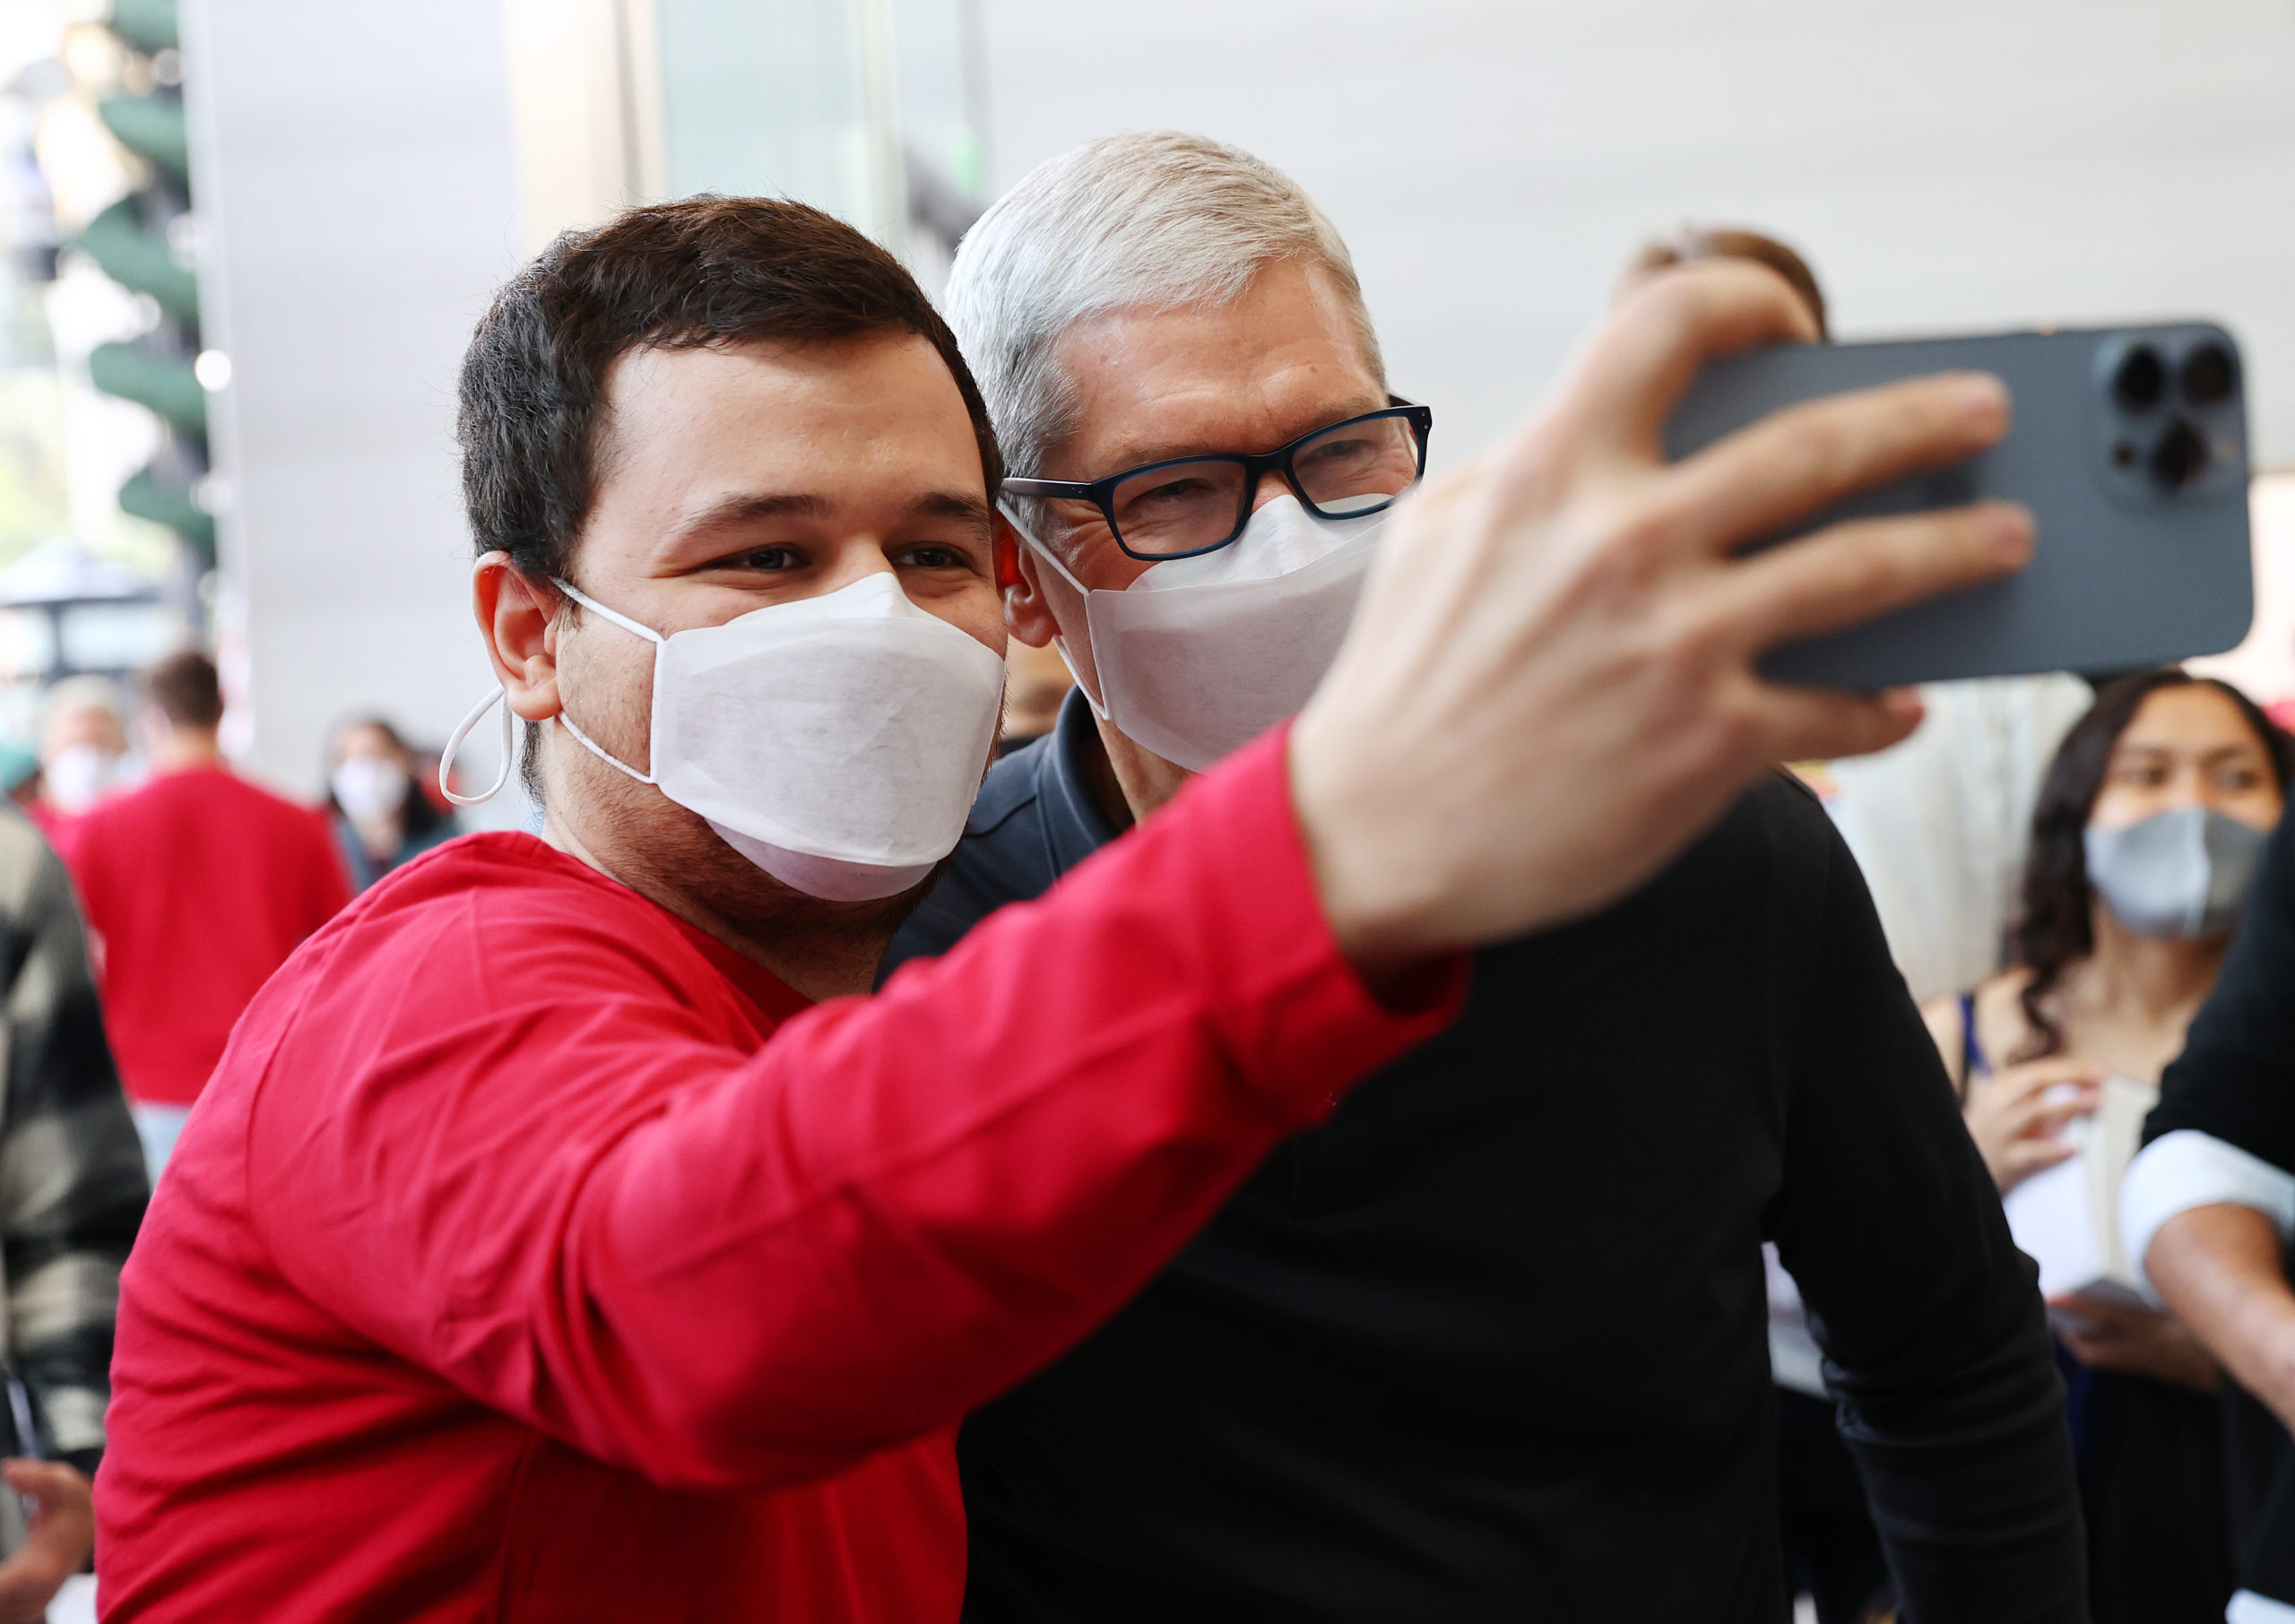 Apple CEO Tim Cook (R) poses for a selfie with a person at the grand opening event for the new Apple store at The Grove on November 19, 2021 in Los Angeles, California. (Photo by Mario Tama/Getty Images)